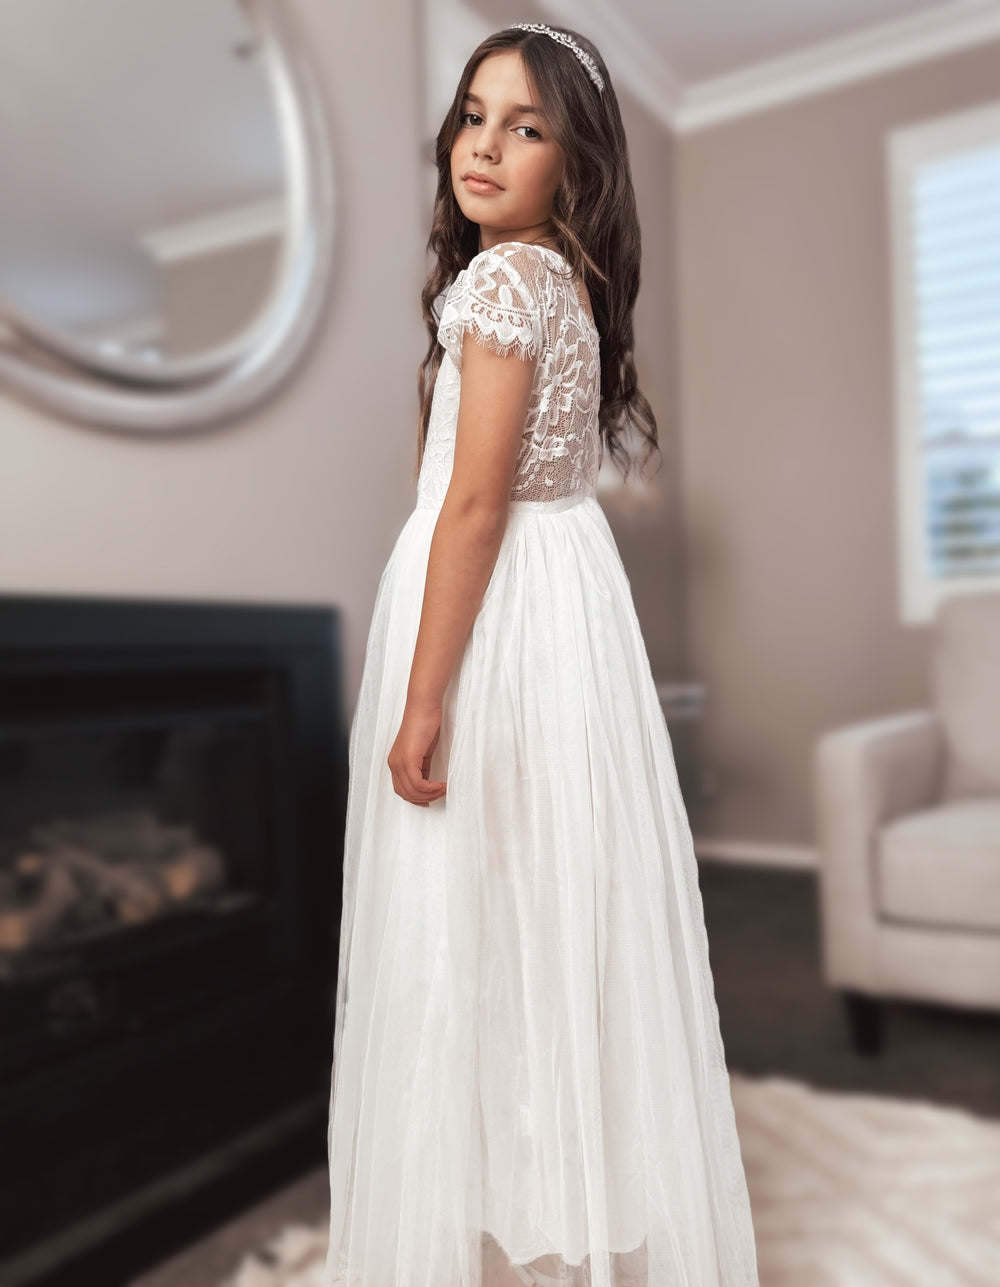 Celeste Girls White Lace & Tulle Dress - All ProductsWhite first communion dress - lace